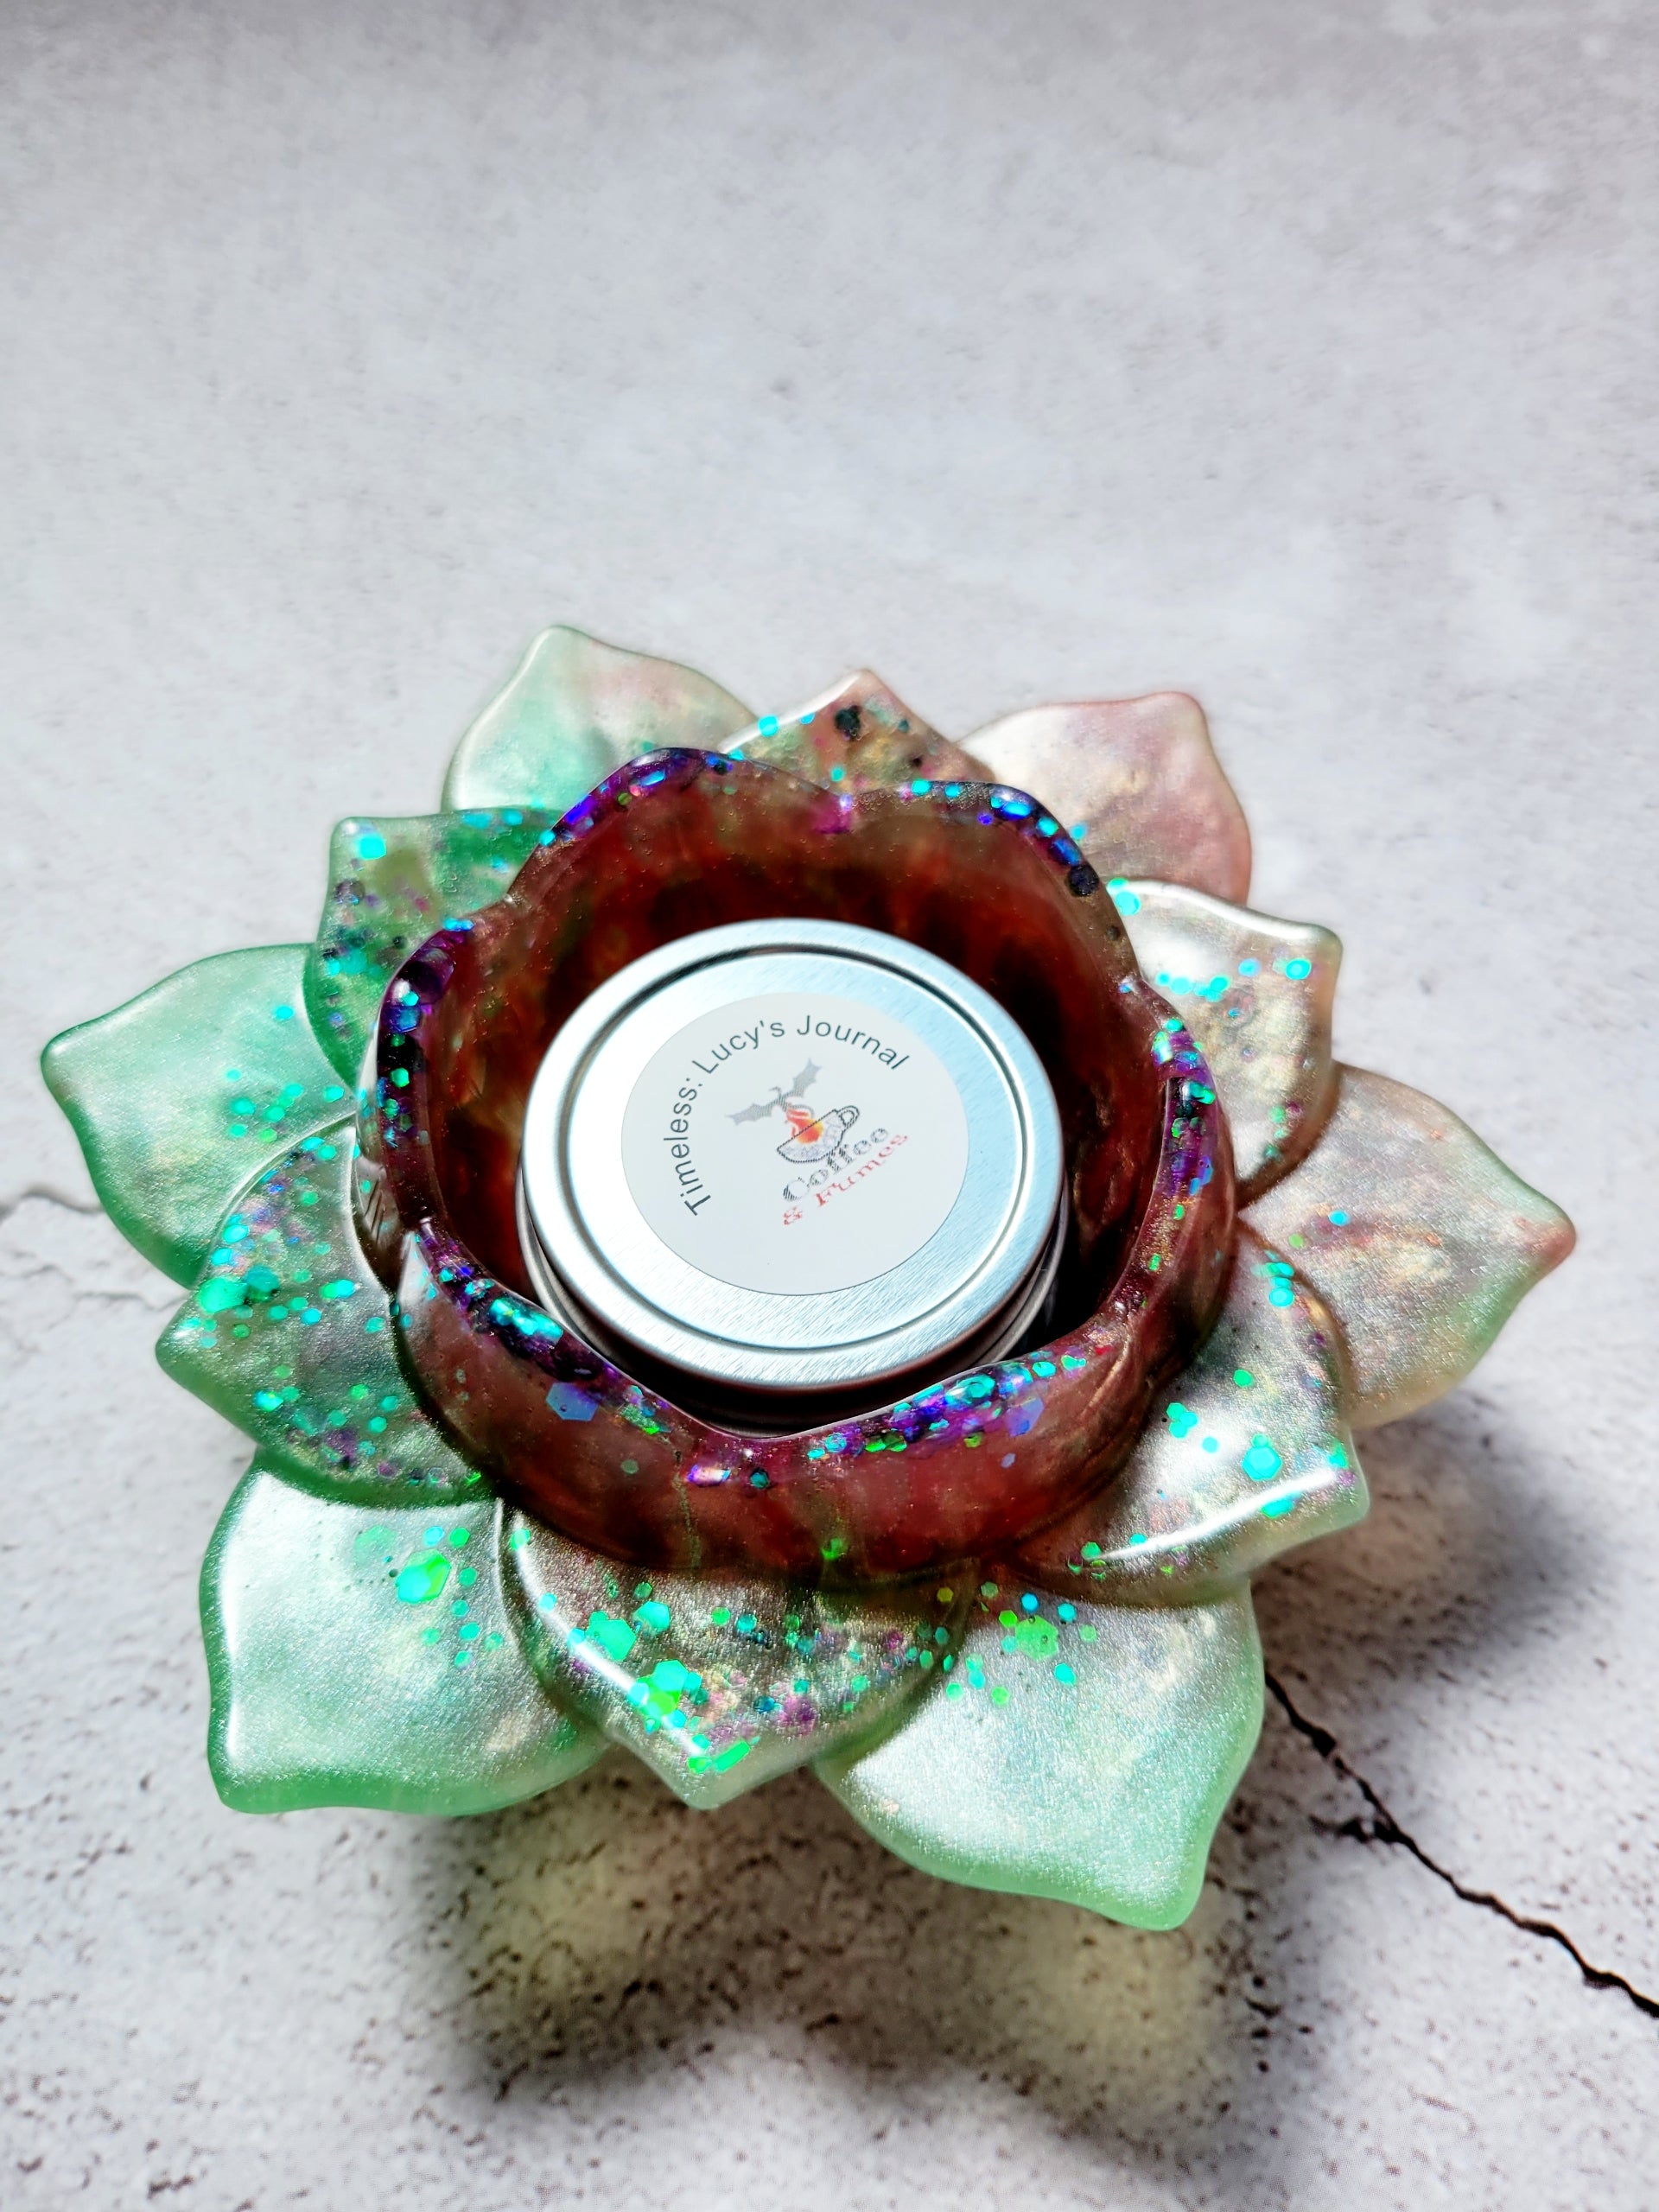 A side birds eye view of a tealight candle holder in the style of a lotus flower. It's got green and brown coloring with flecks of colorful glitter along the petals.  There is a tealight candle inside to show size comparison.